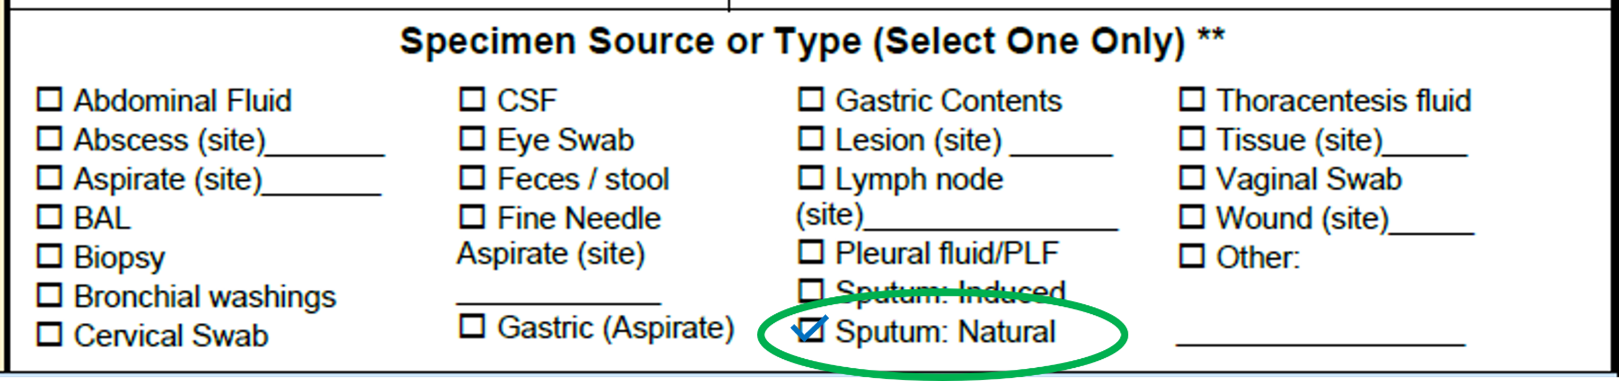 "A screenshot of an excerpt from a G-MYCO specimen submission form that lists specimen sources or types. "Sputum: Natural" is marked with a check mark"